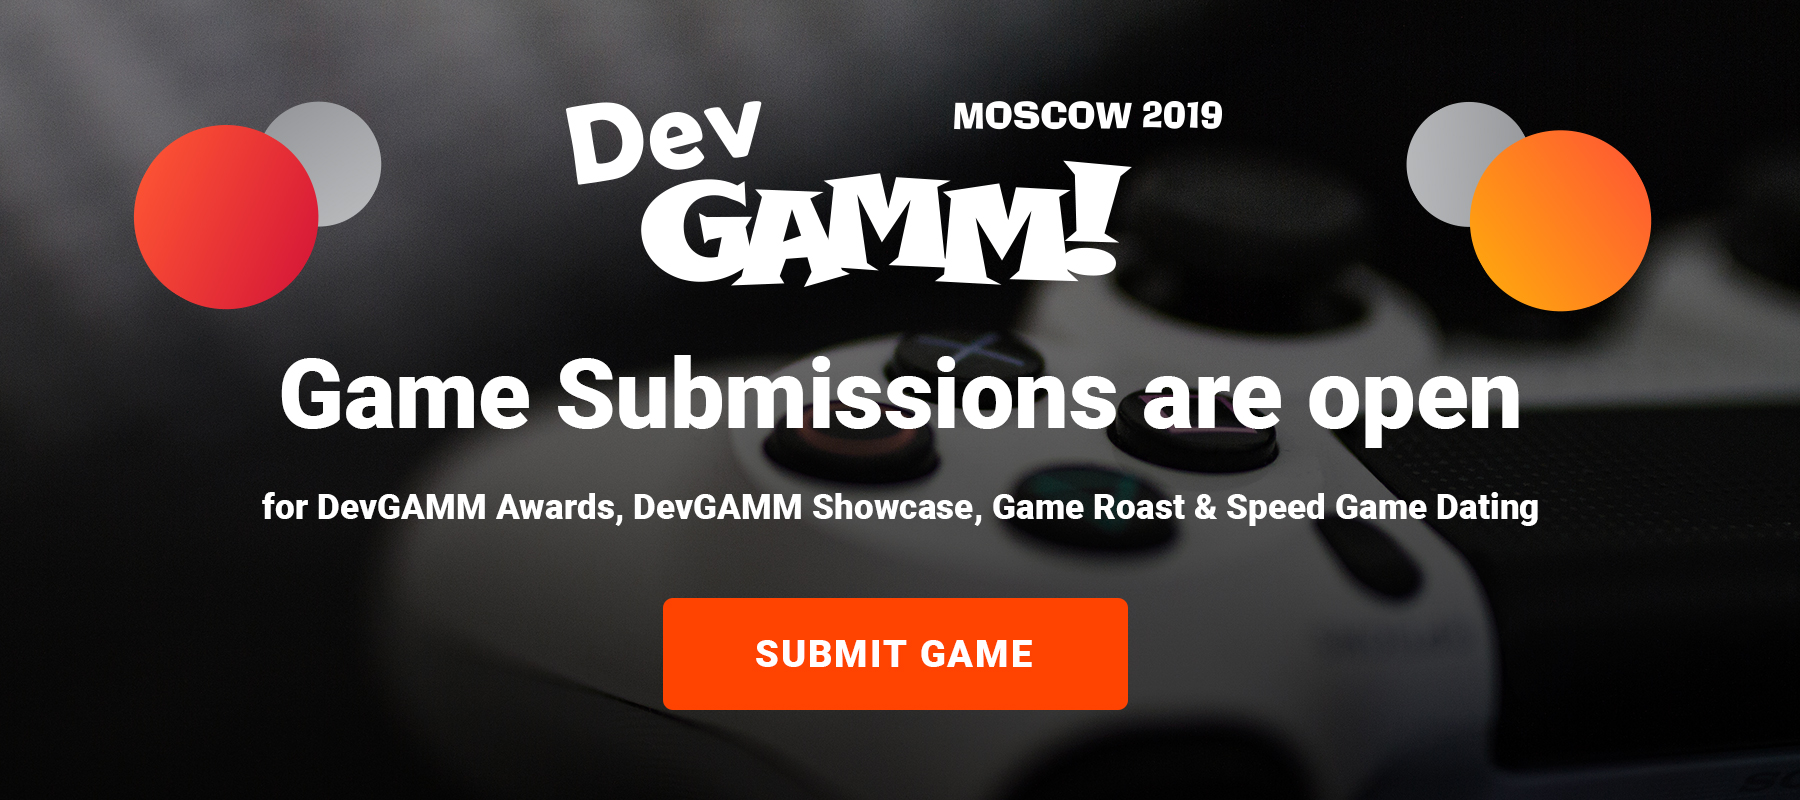 Game Submissions for Awards, Showcase, Game Roast and Speed Game Dating are open